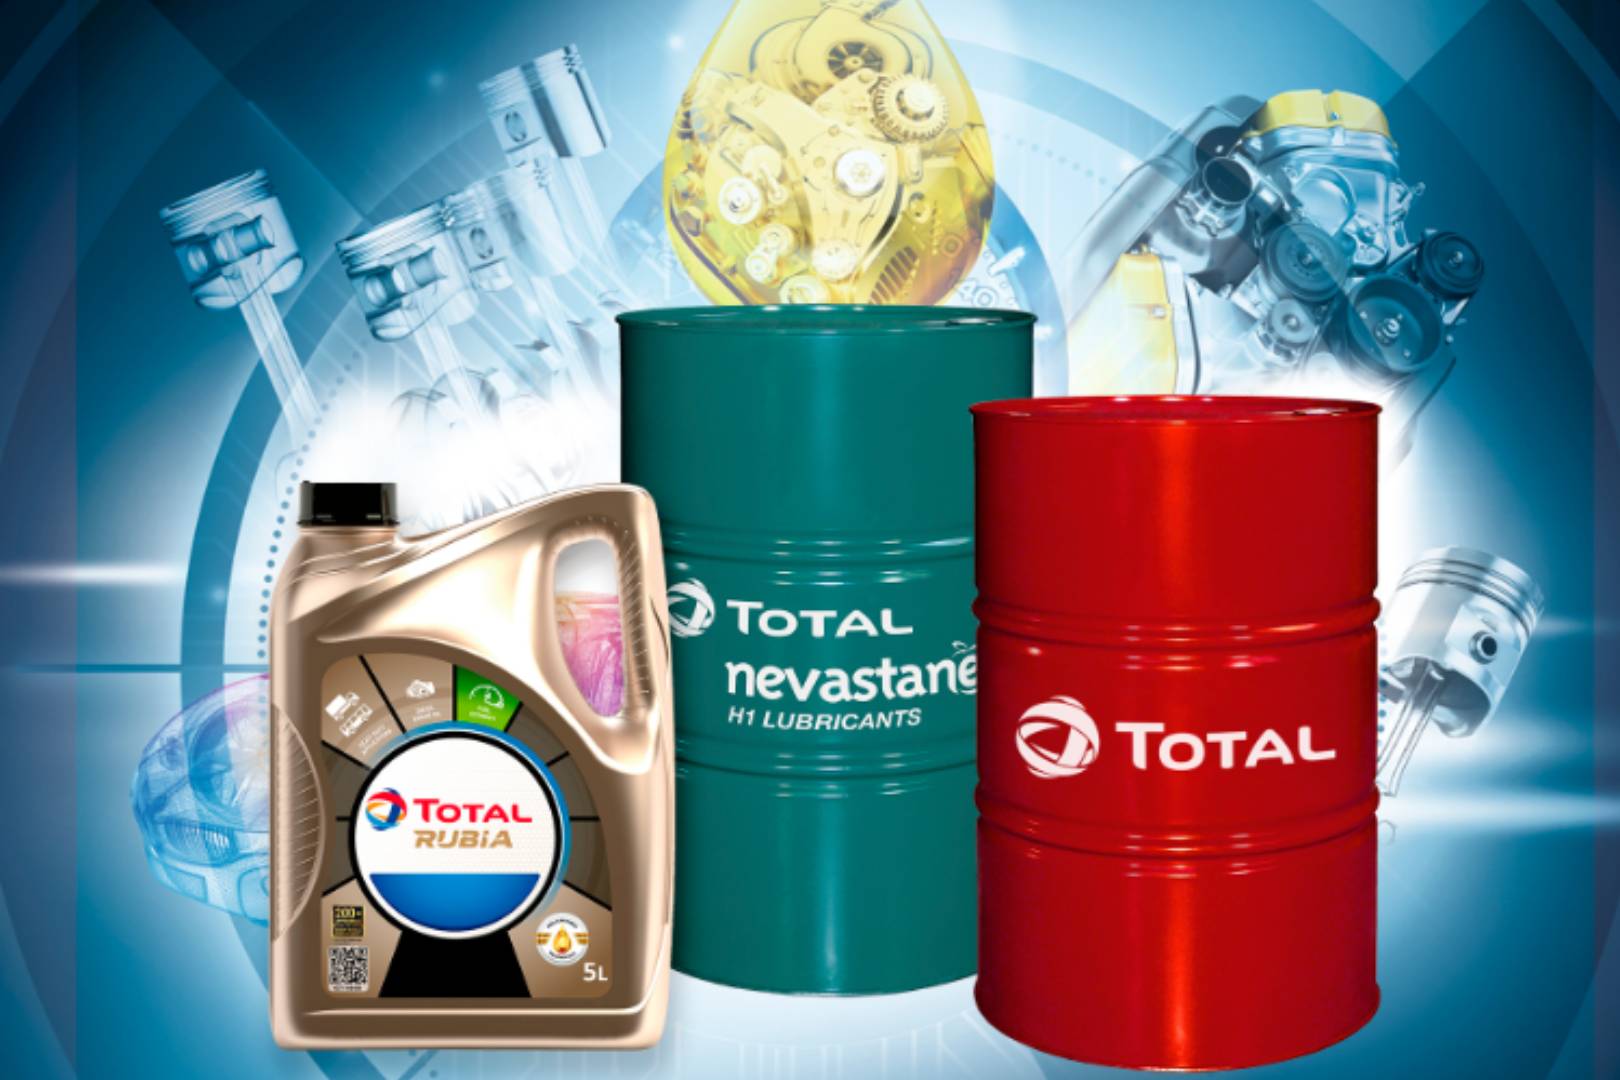 Total Lubricantes